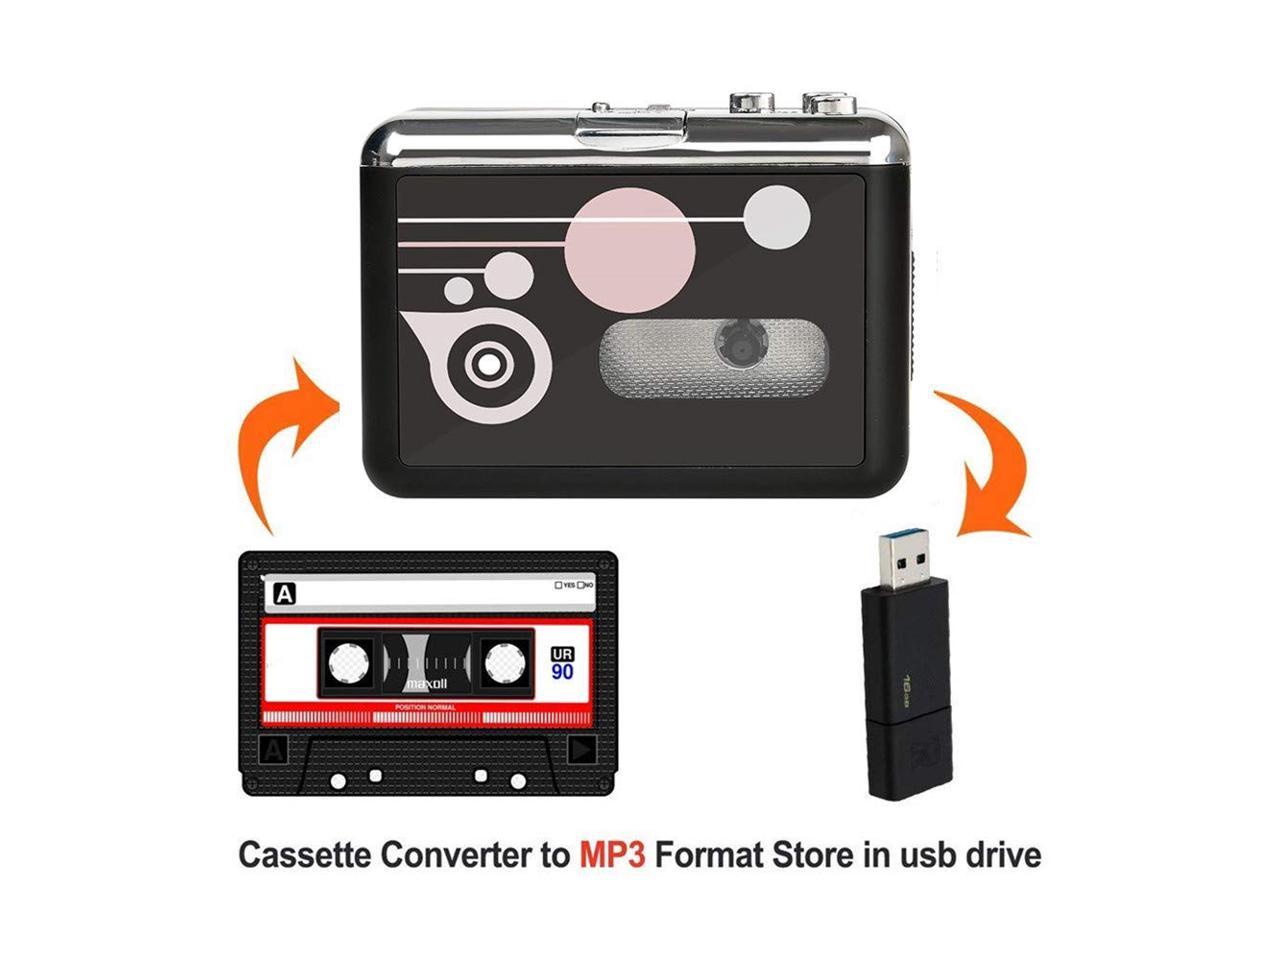 Portable Converter Recorder Convert Tapes to Digital MP3 Save into USB Flash Drive/ No PC Required Black Rybozen Cassette Player